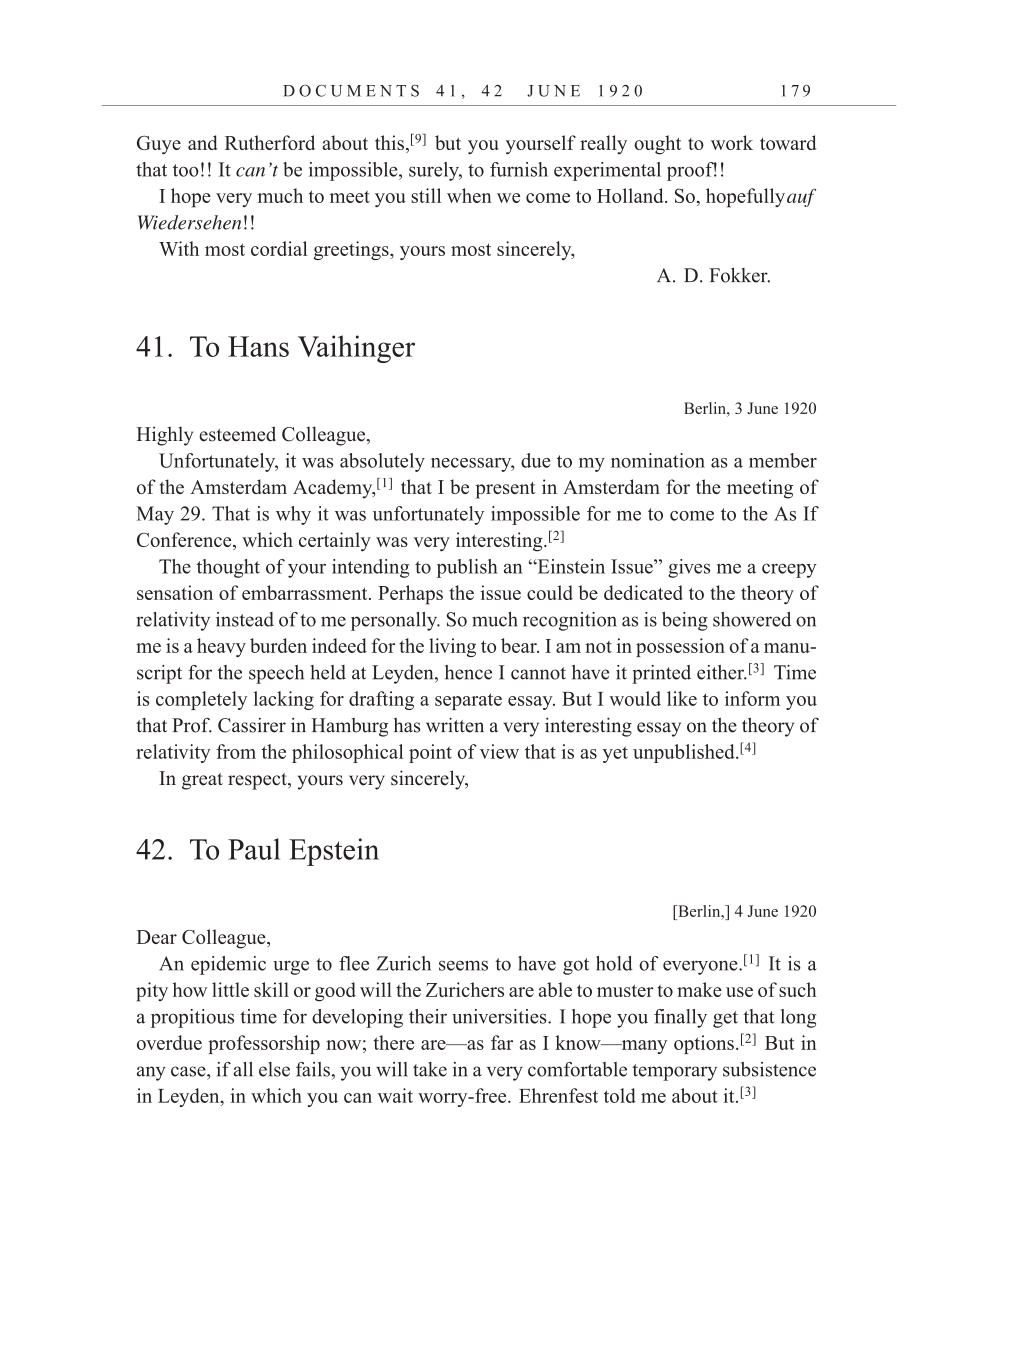 Volume 10: The Berlin Years: Correspondence, May-December 1920, and Supplementary Correspondence, 1909-1920 (English translation supplement) page 179